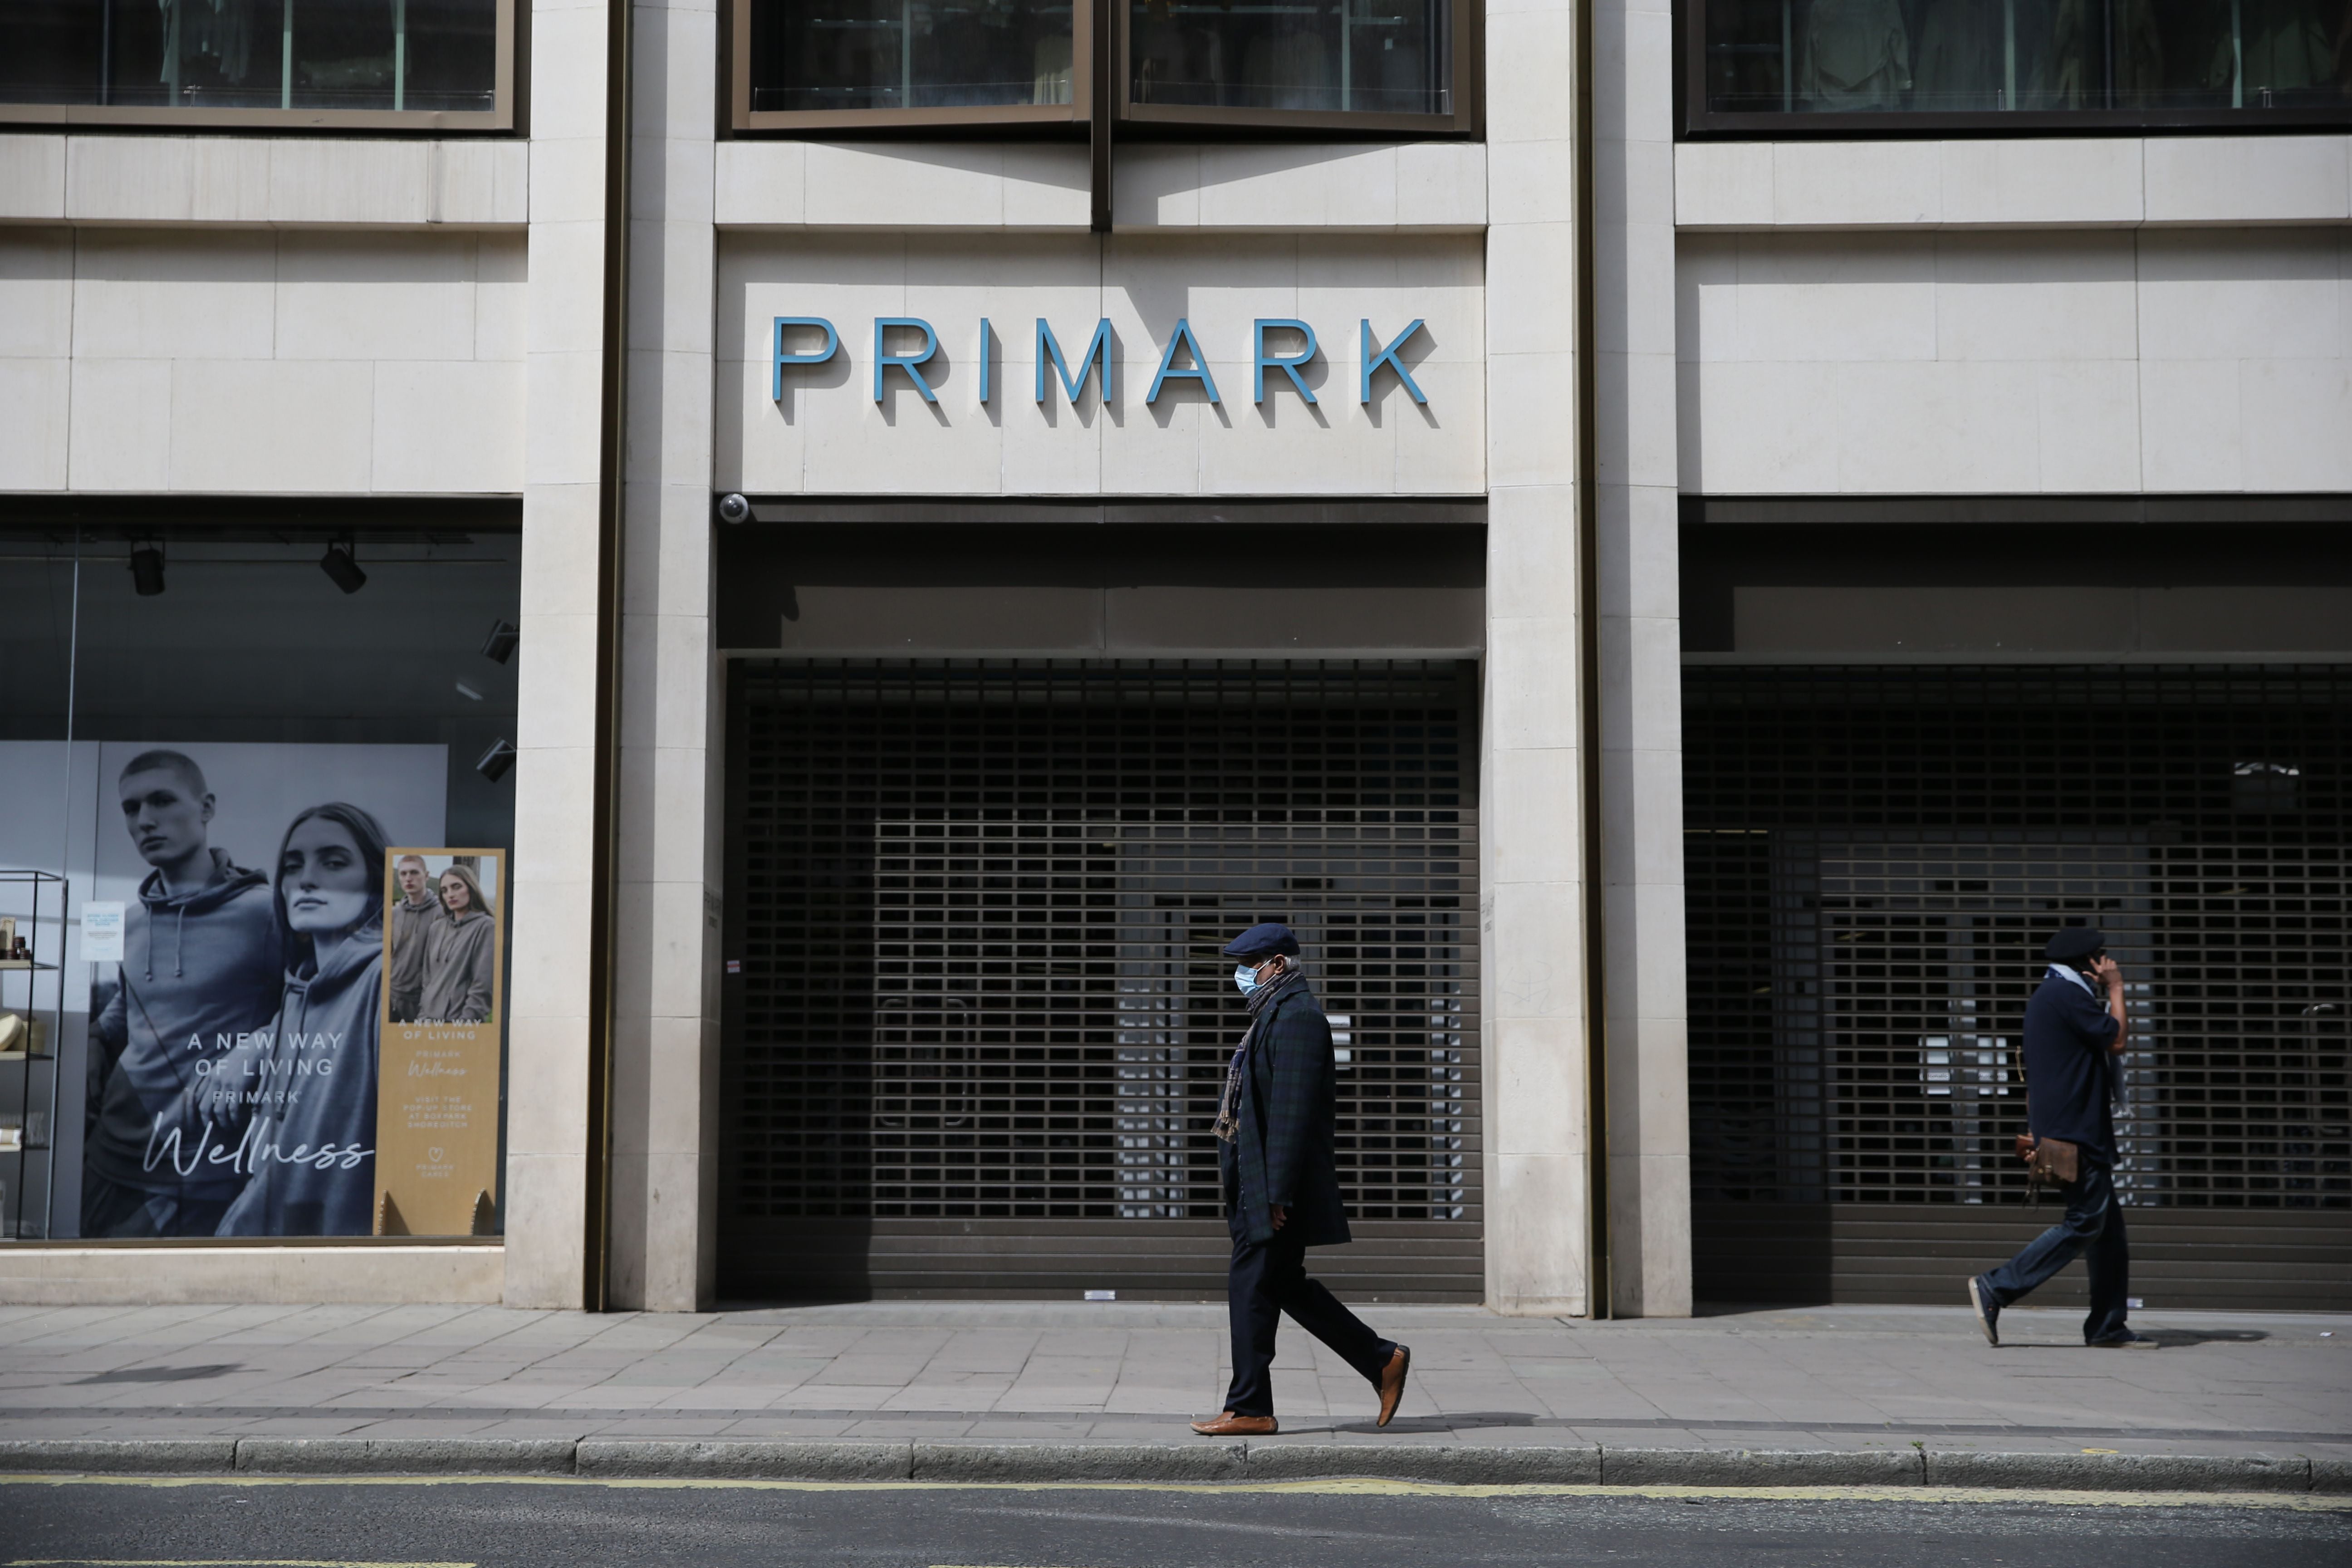 Primark said it would not take the Job Retention Bonus, intended to replace furlough, until the pandemic got in the way and forced the latter’s extention